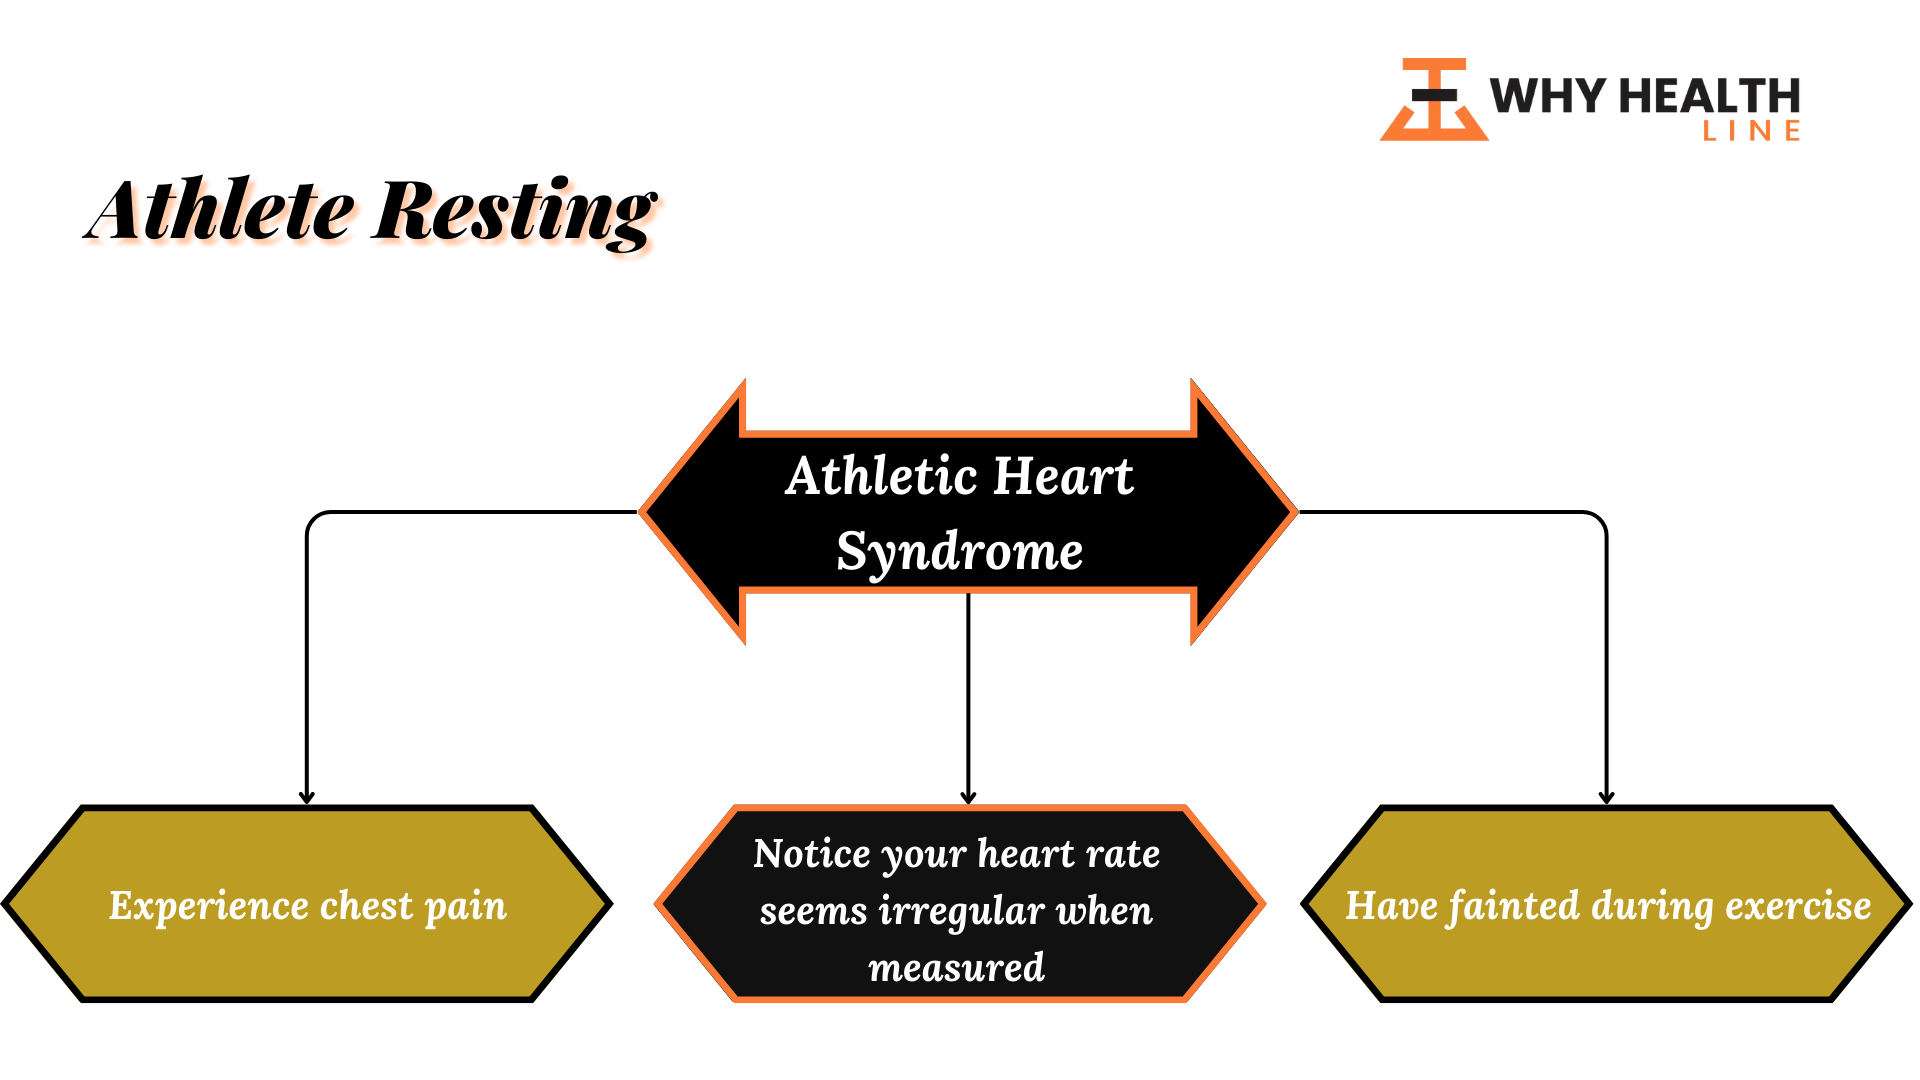 Athletic Heart Syndrome